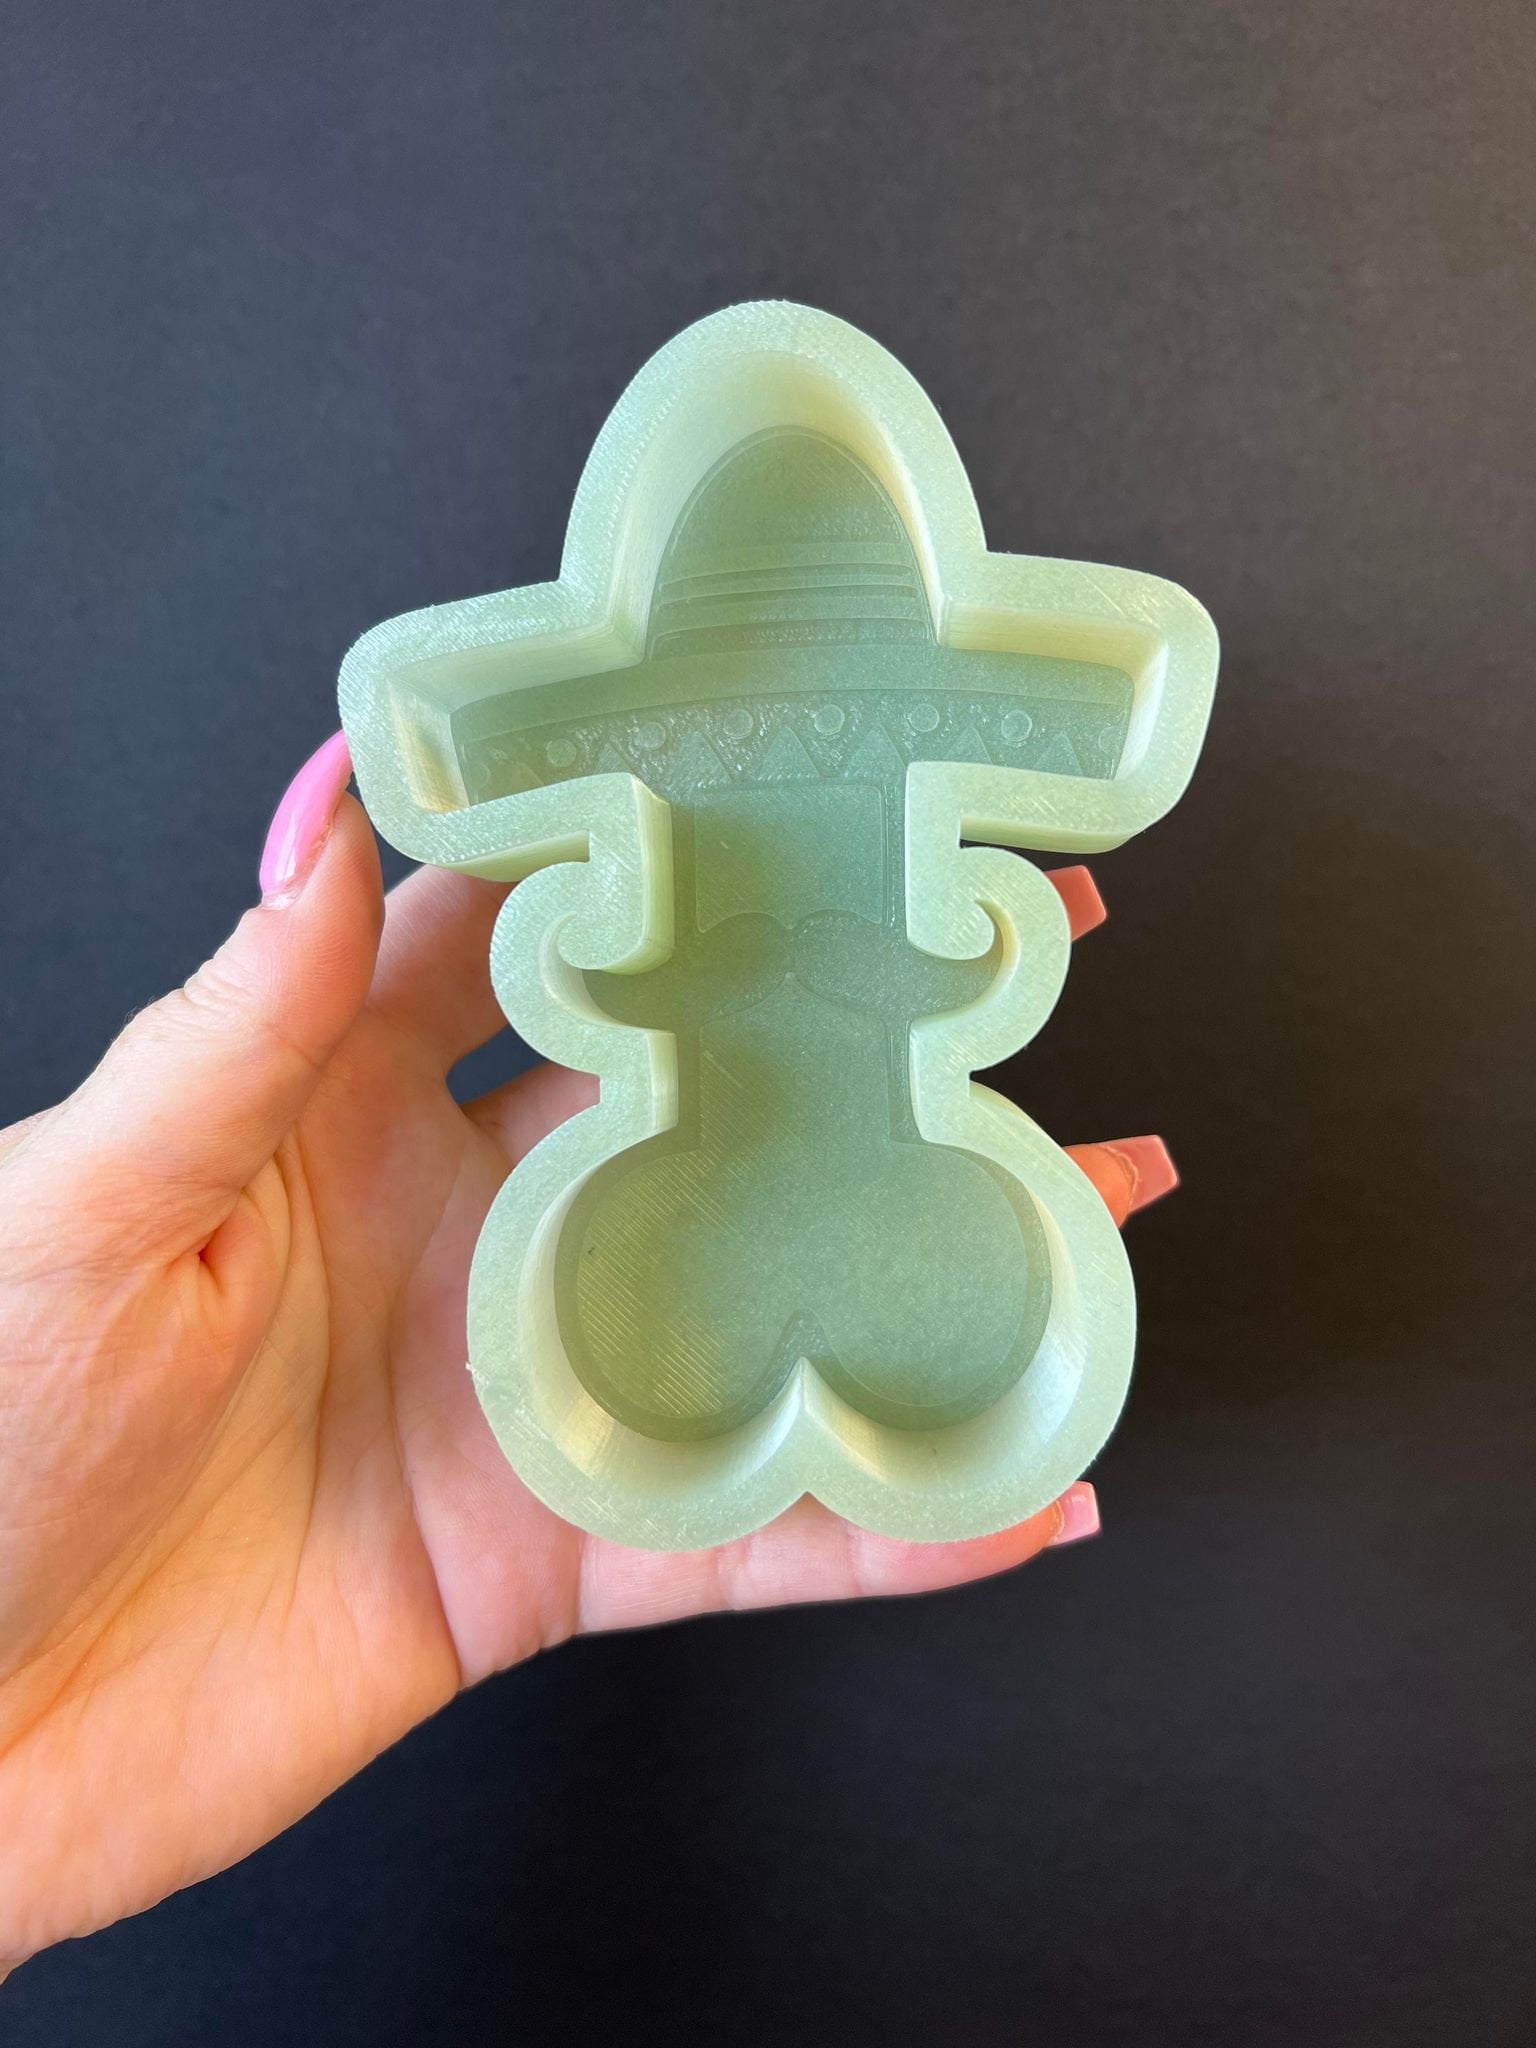 Penis Mold, Dick Mold, Silicone Penis Mold, Penis Candle Mold, Penis  Chocolate Mold, Penis Jello Mold, Dick Jello Mold, Penis Ice Cubes